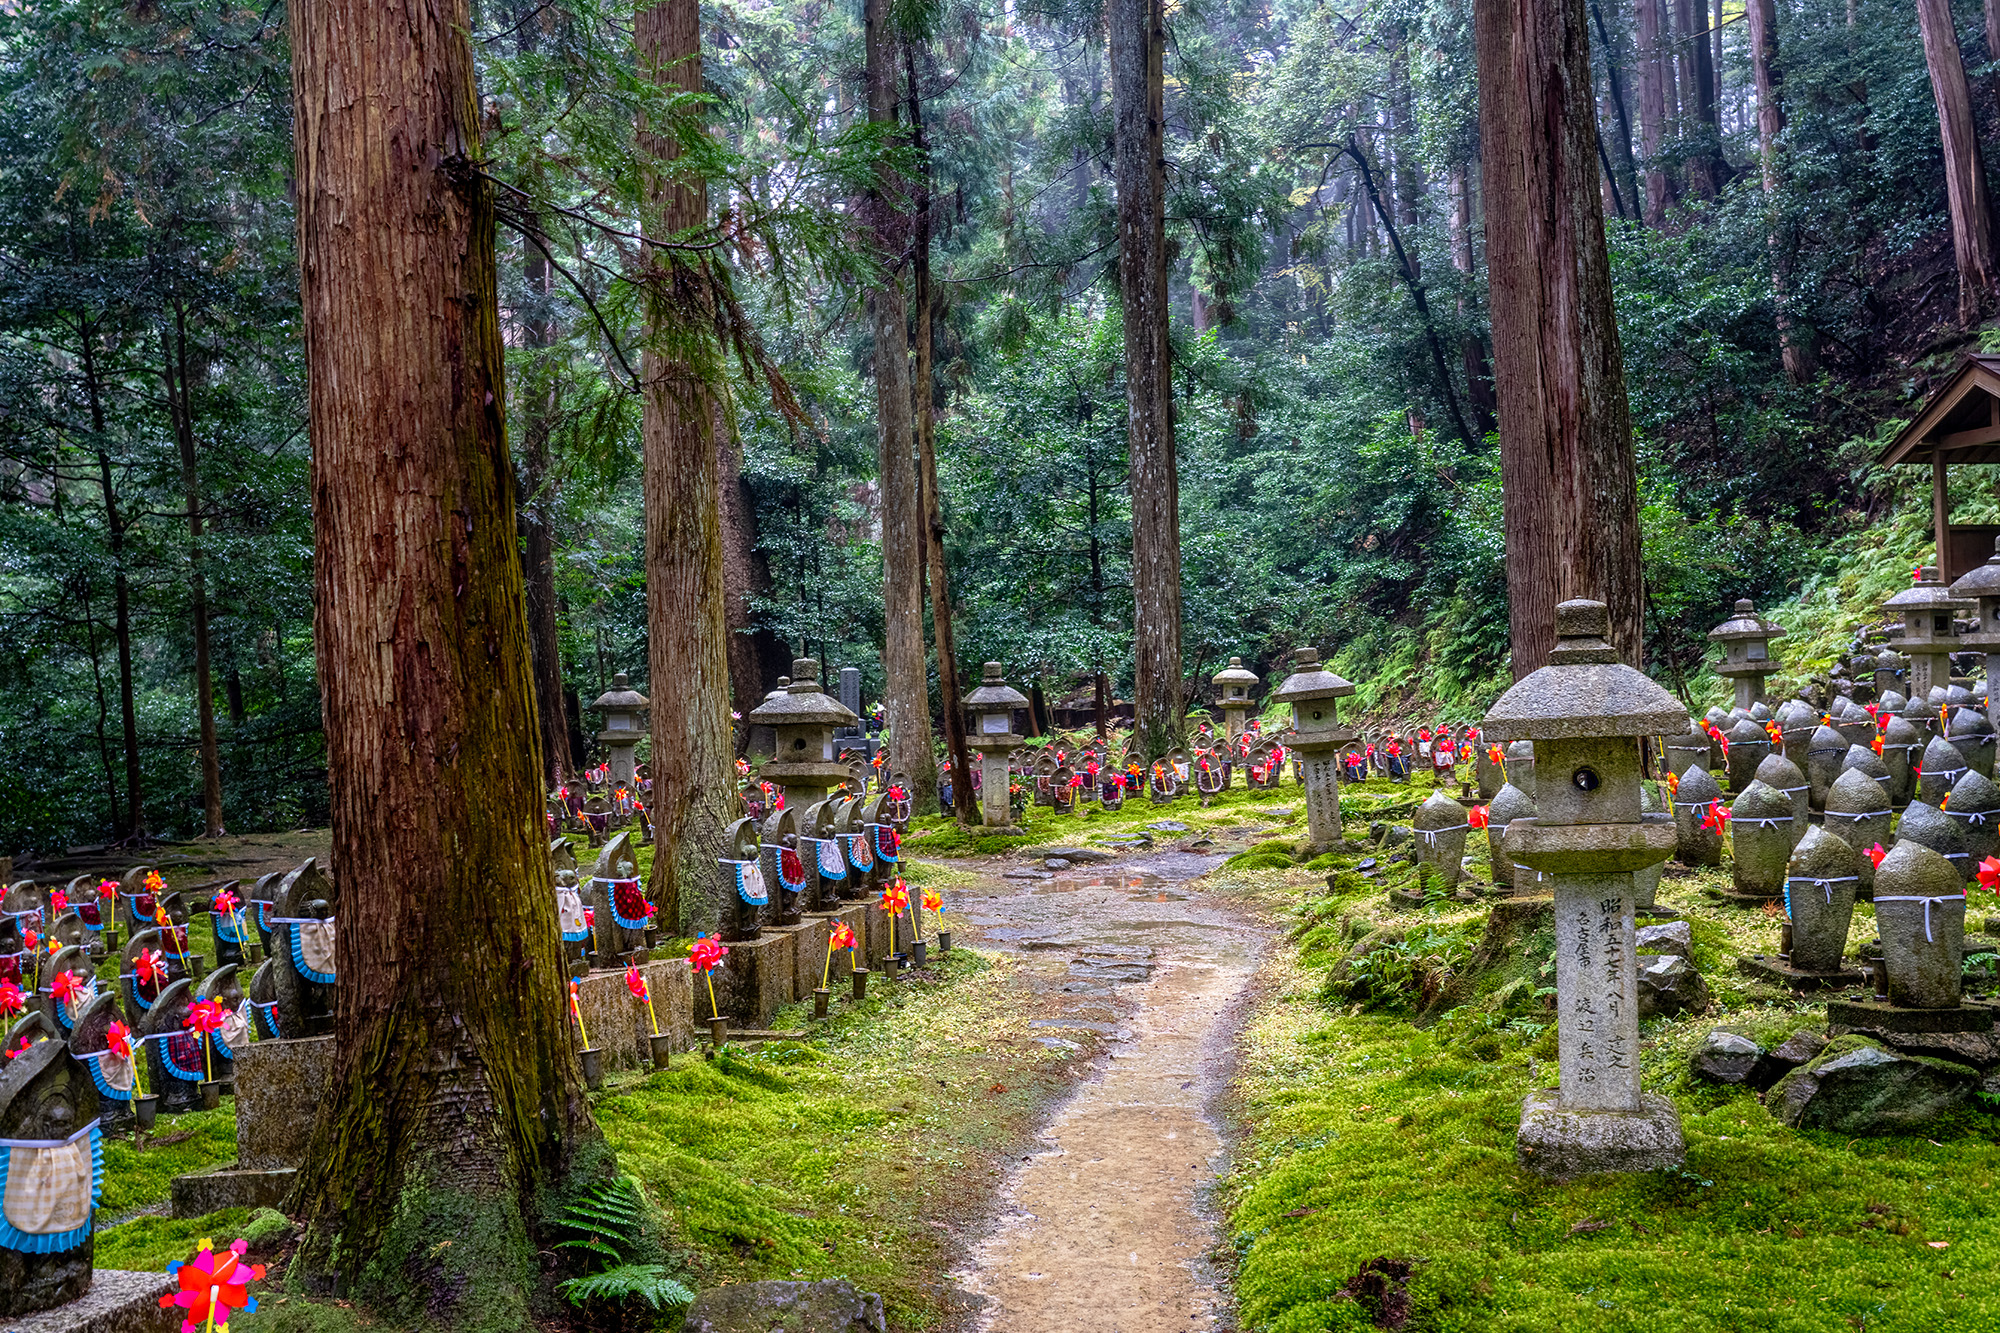 In the heart of Kongorin-ji Temple, this photograph captures a mesmerizing scene. The forest comes alive with an assembly of...